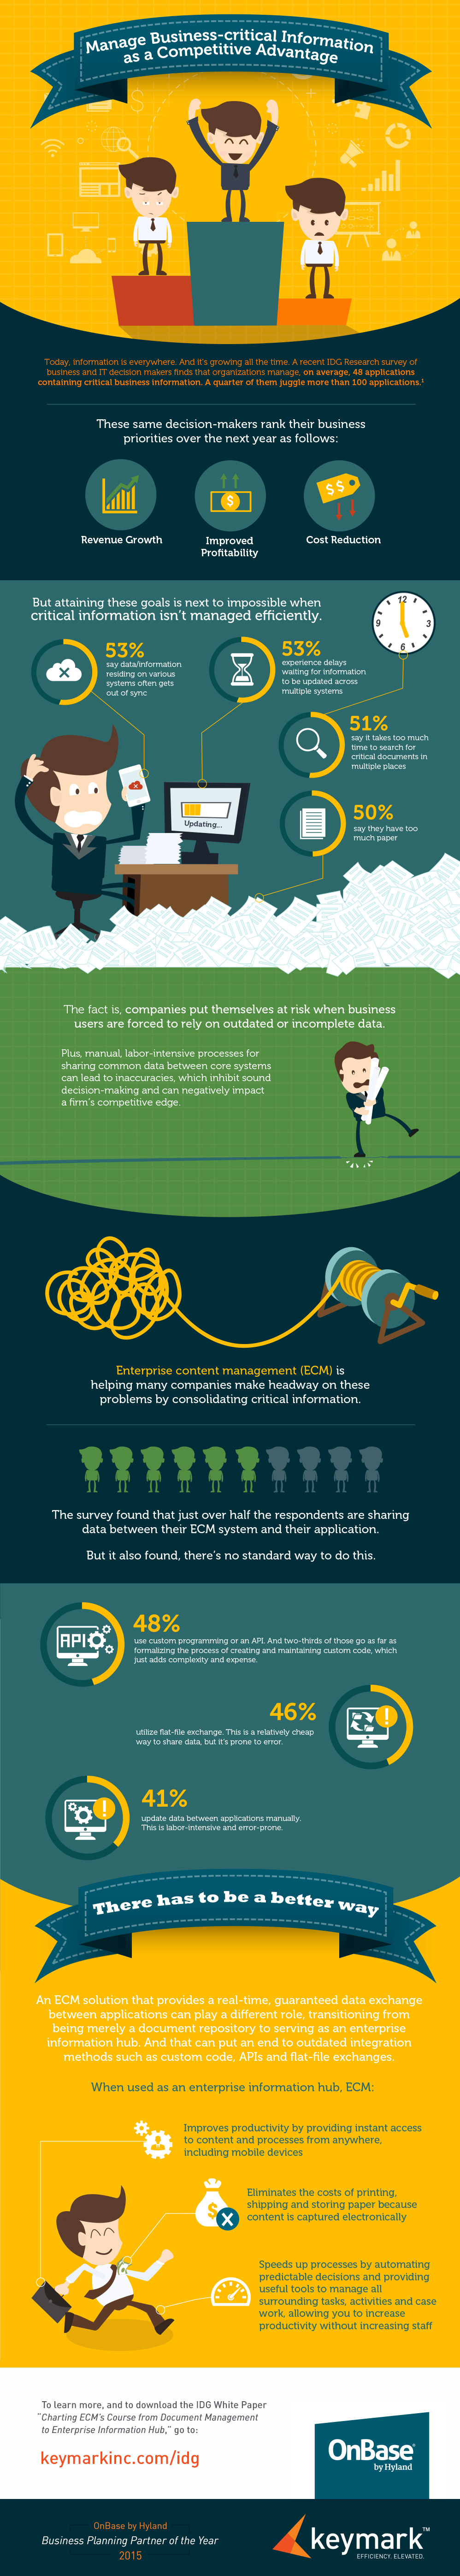 Infographic-OnBase-Information-As-Competitive-Advantage